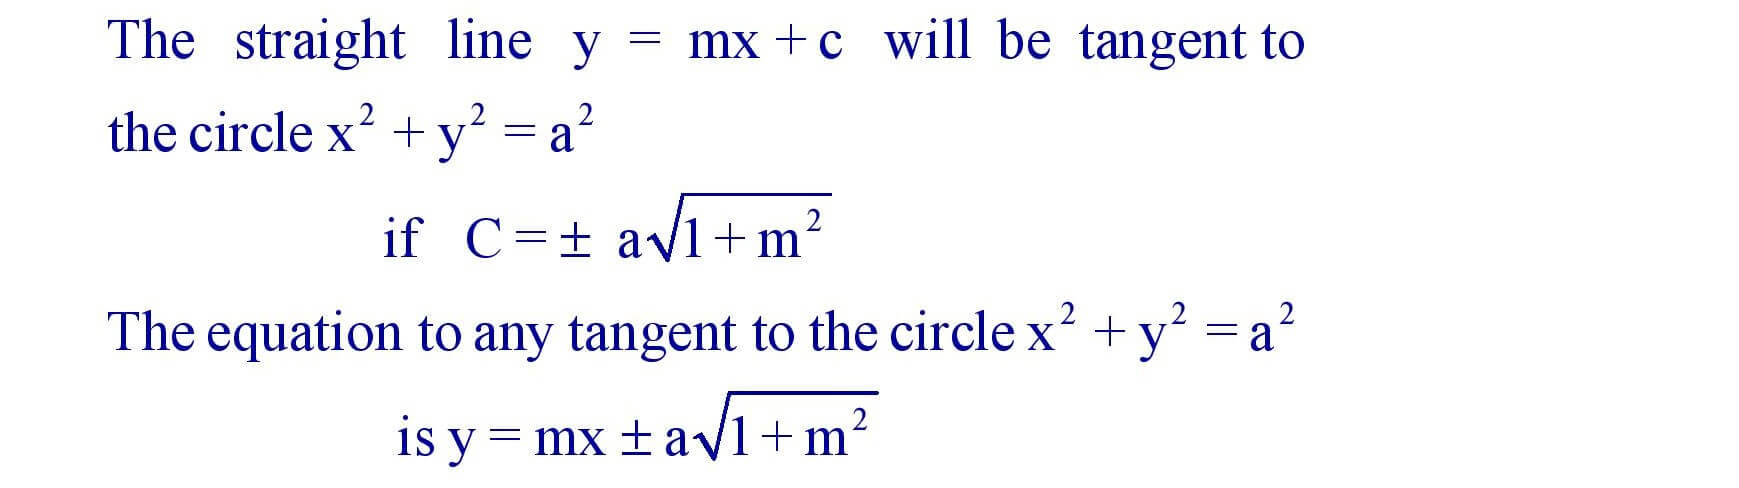 Condition of Tangency